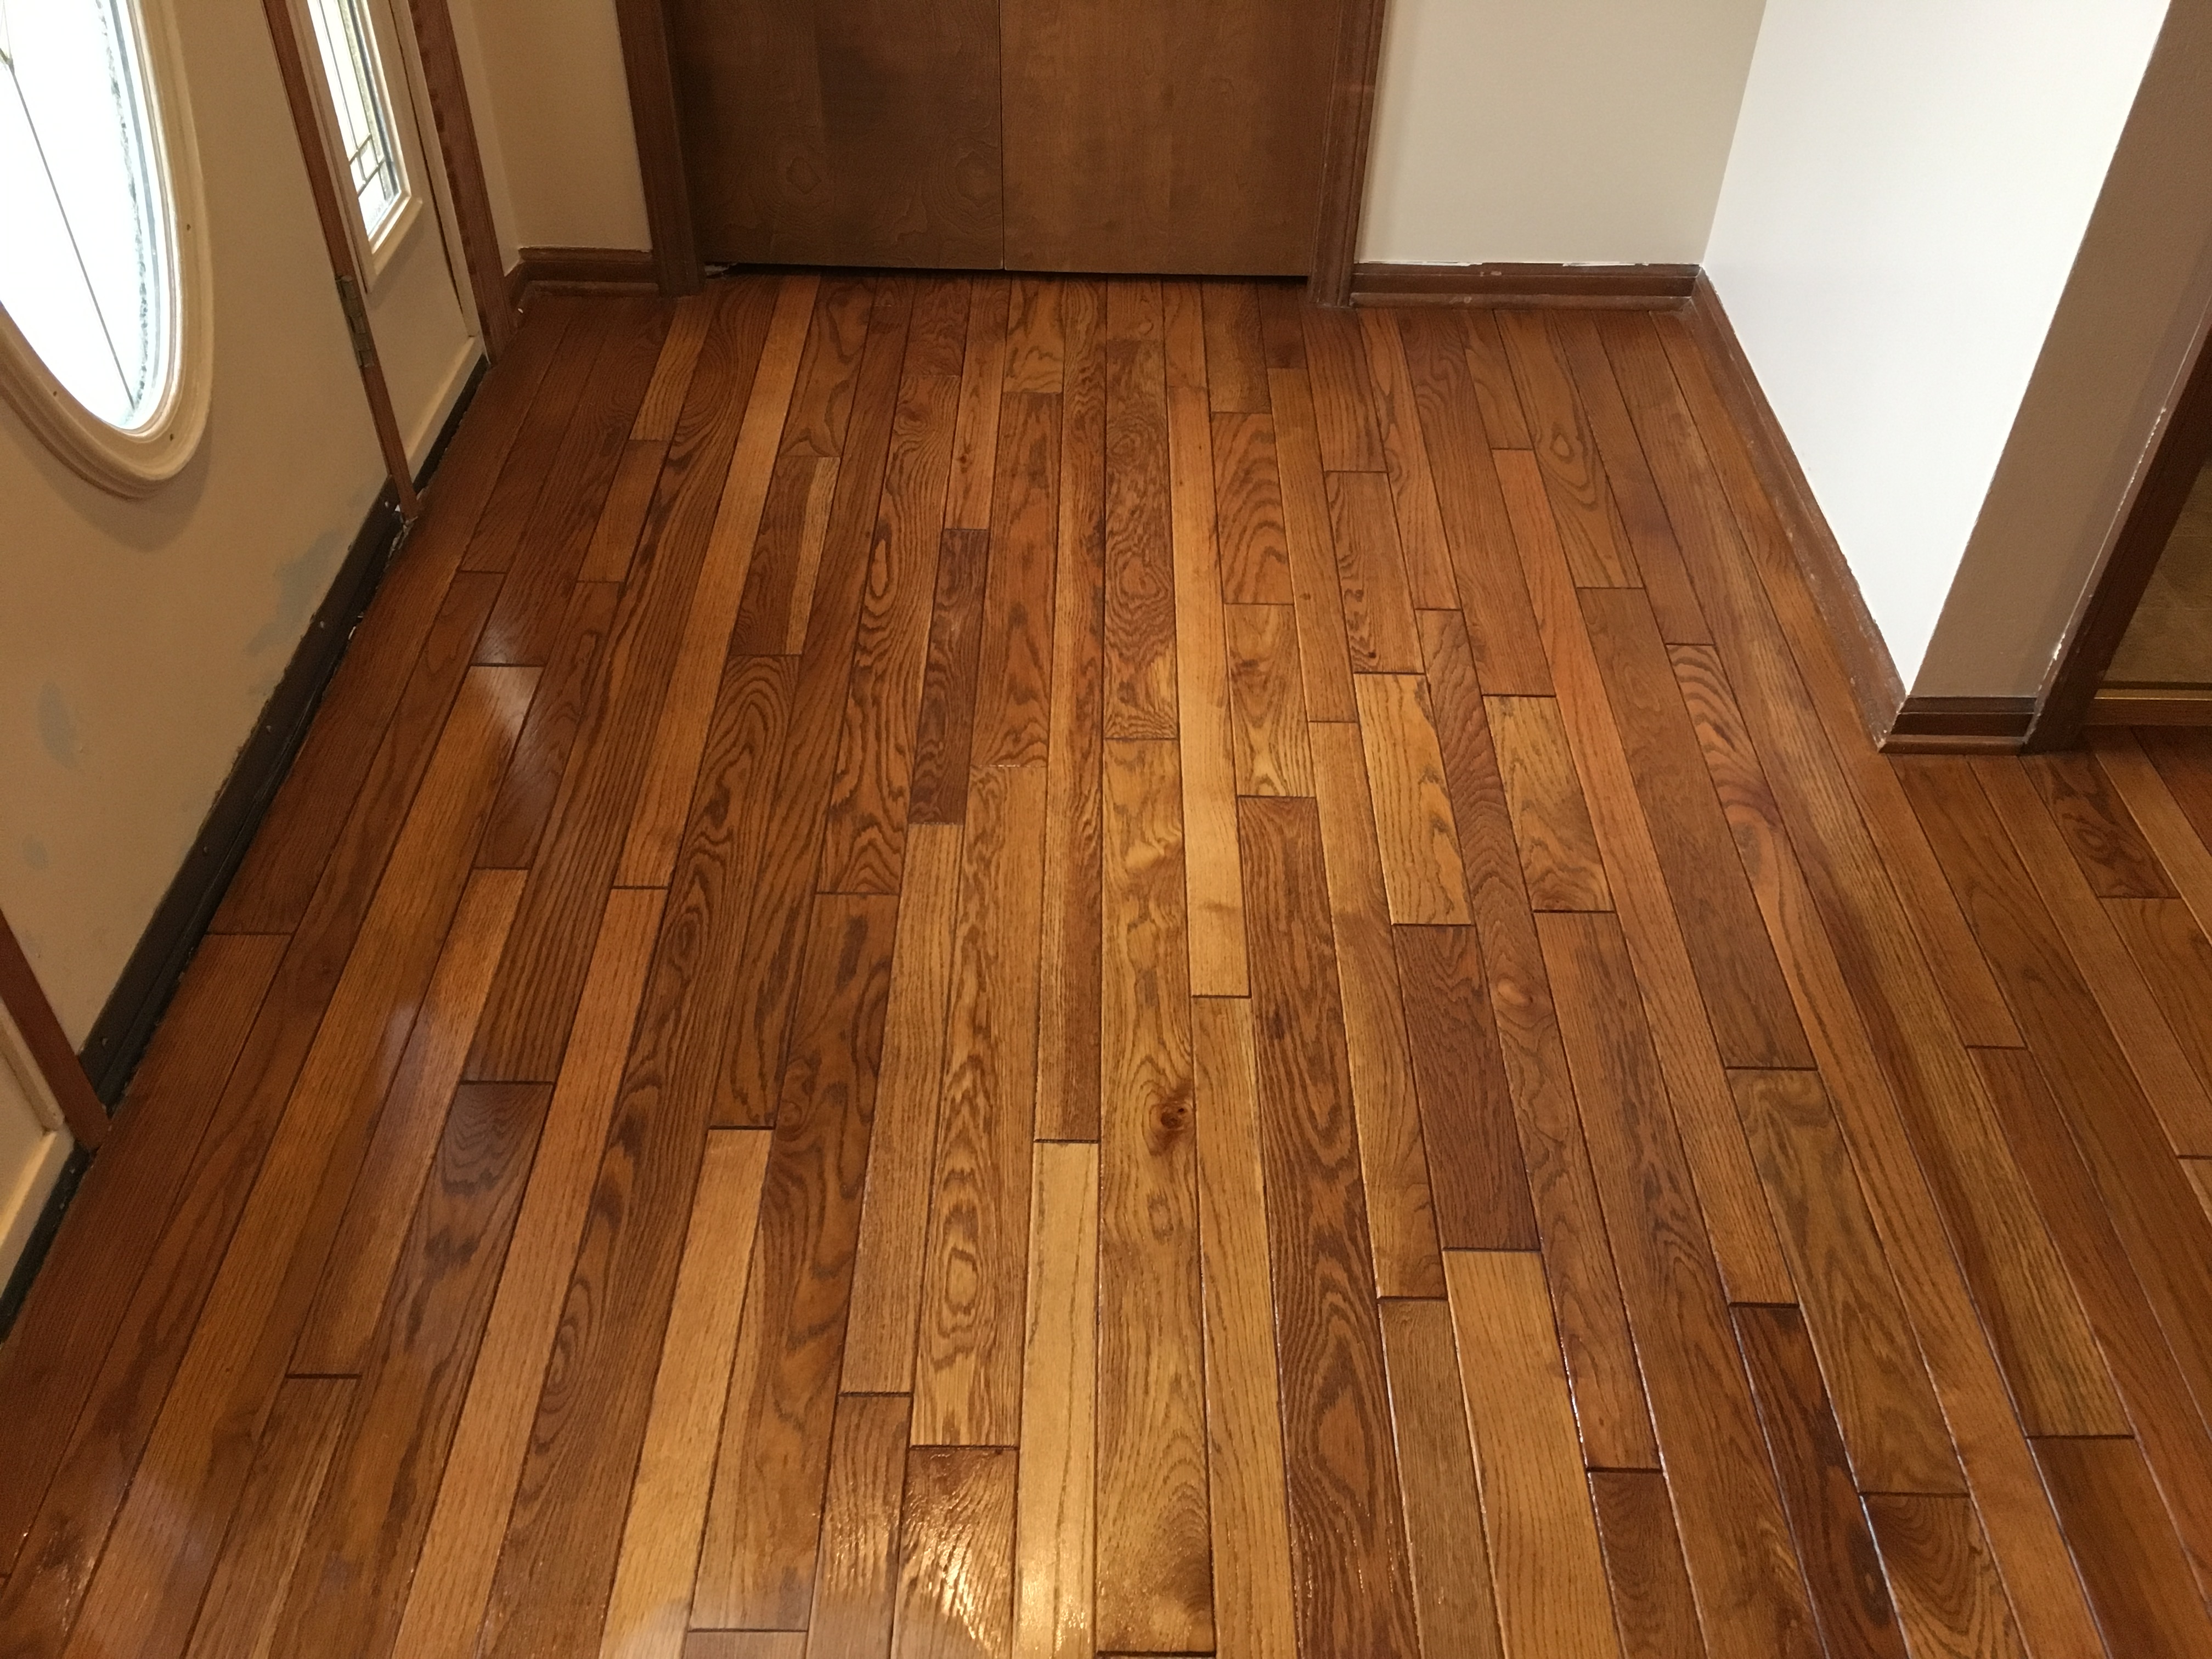 Referral Wood Floor Cleaning - After